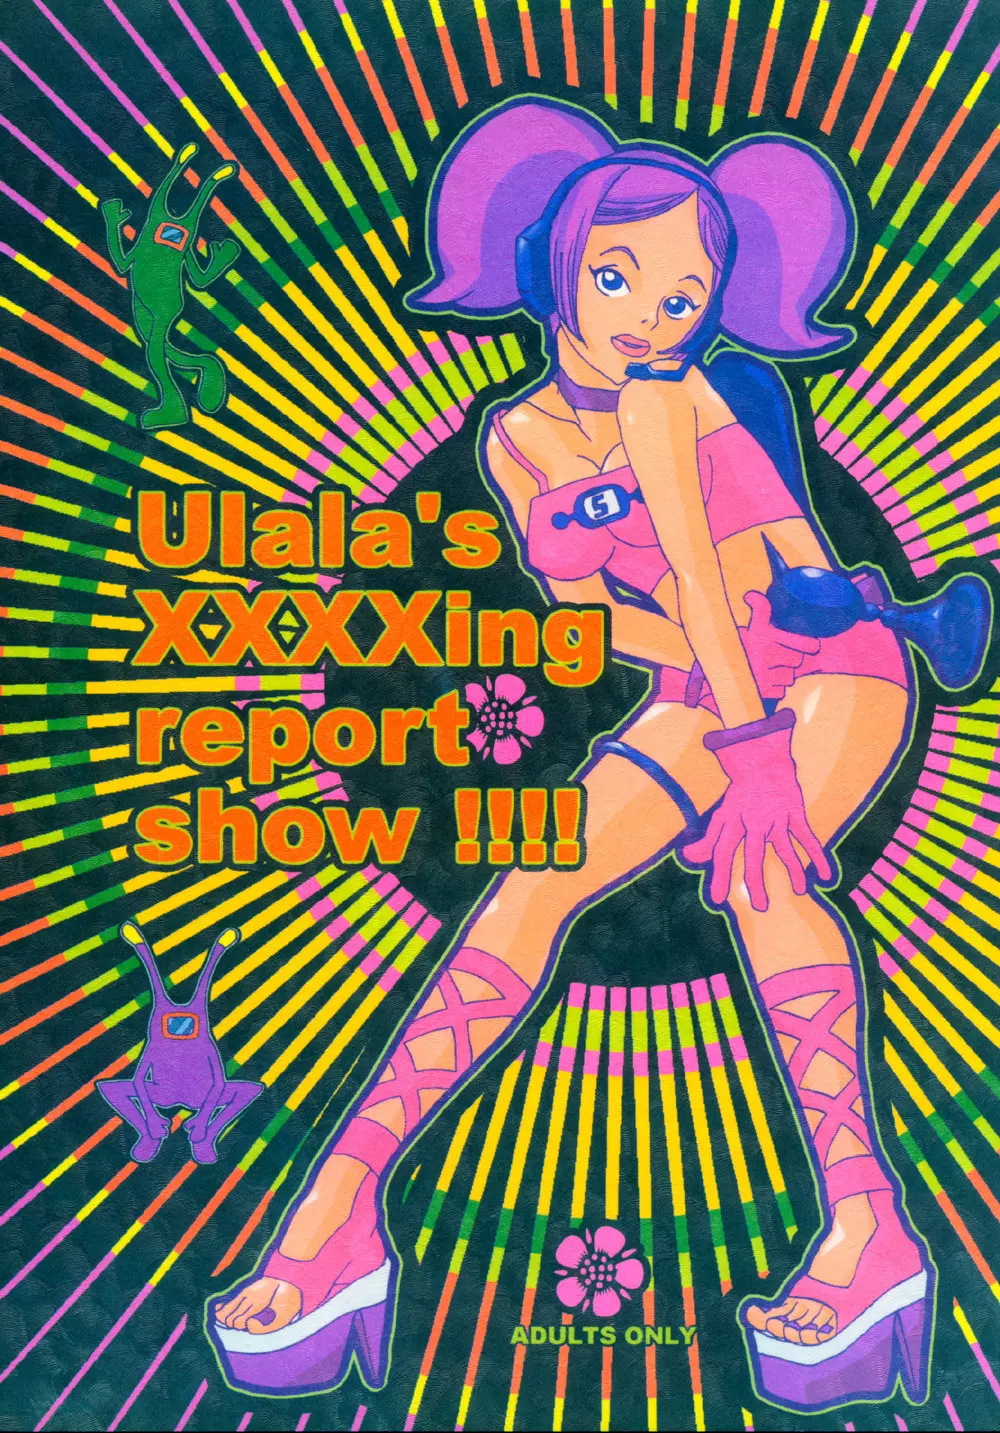 Ulala’s XXXXing Report Show!!!!